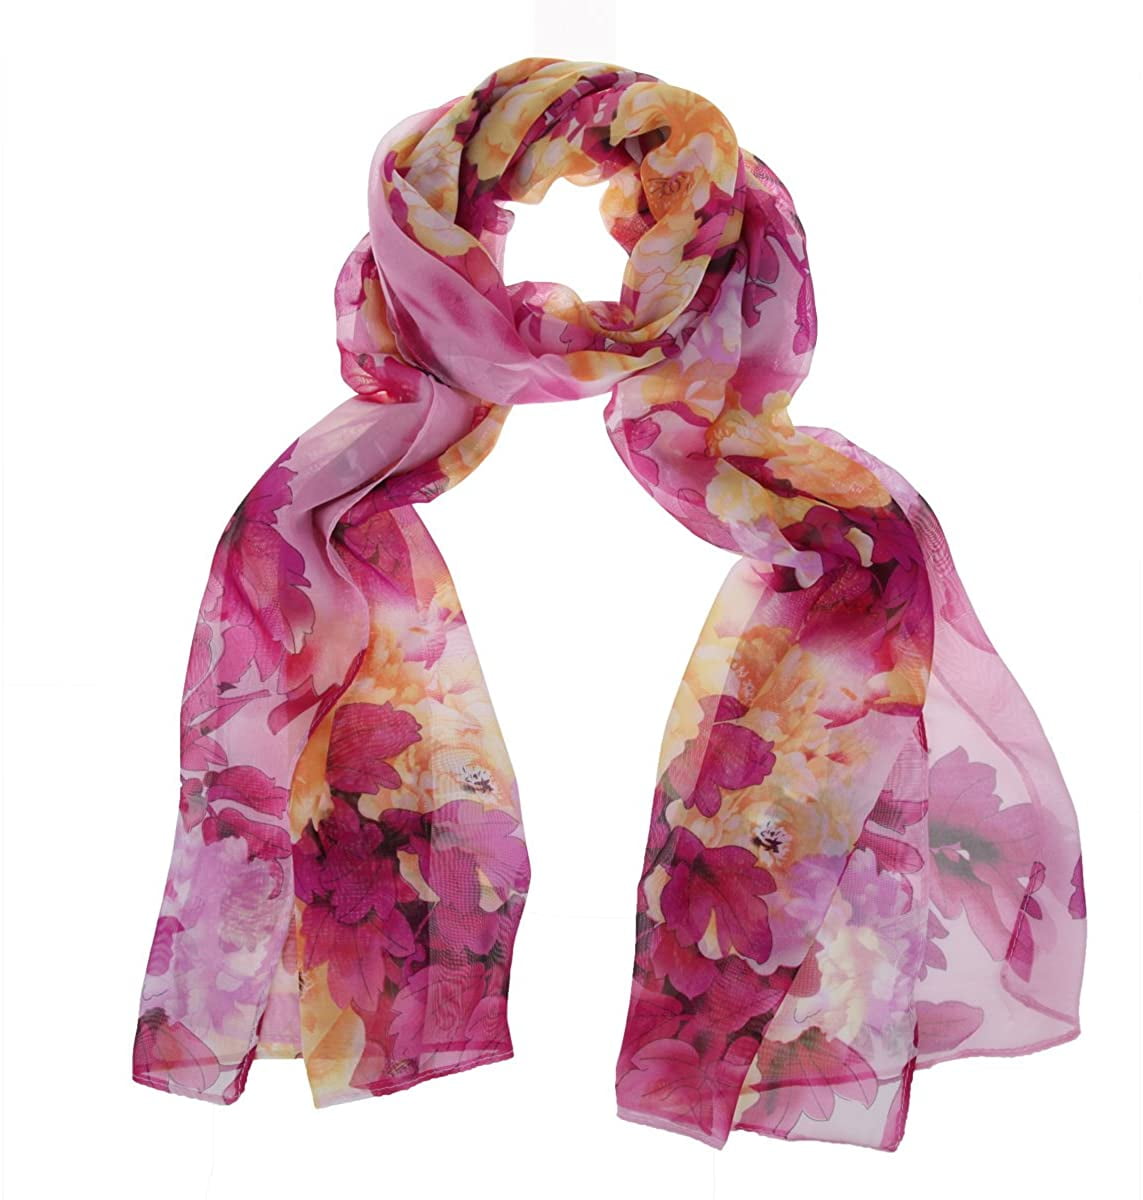 Floral Scarves for Women Lightweight Wrap and Shawls Girls Fashion ...